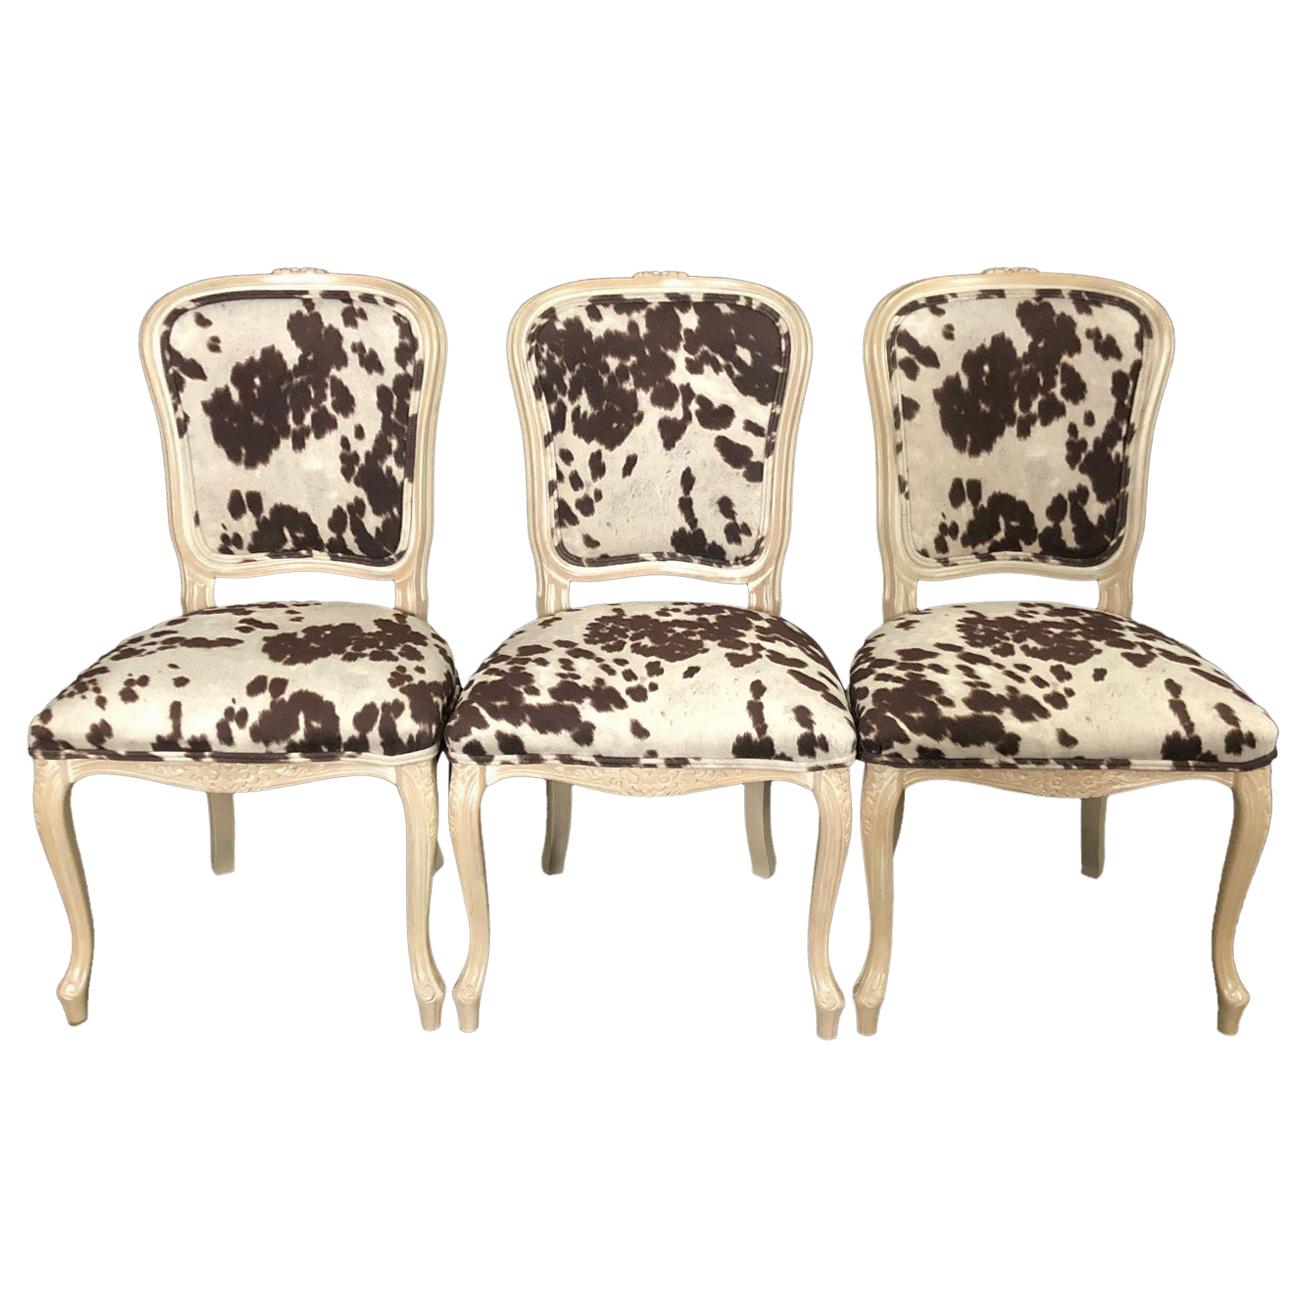 Set of Three Louis XV Style Bleached Wood Chairs with Faux Hide Upholstery